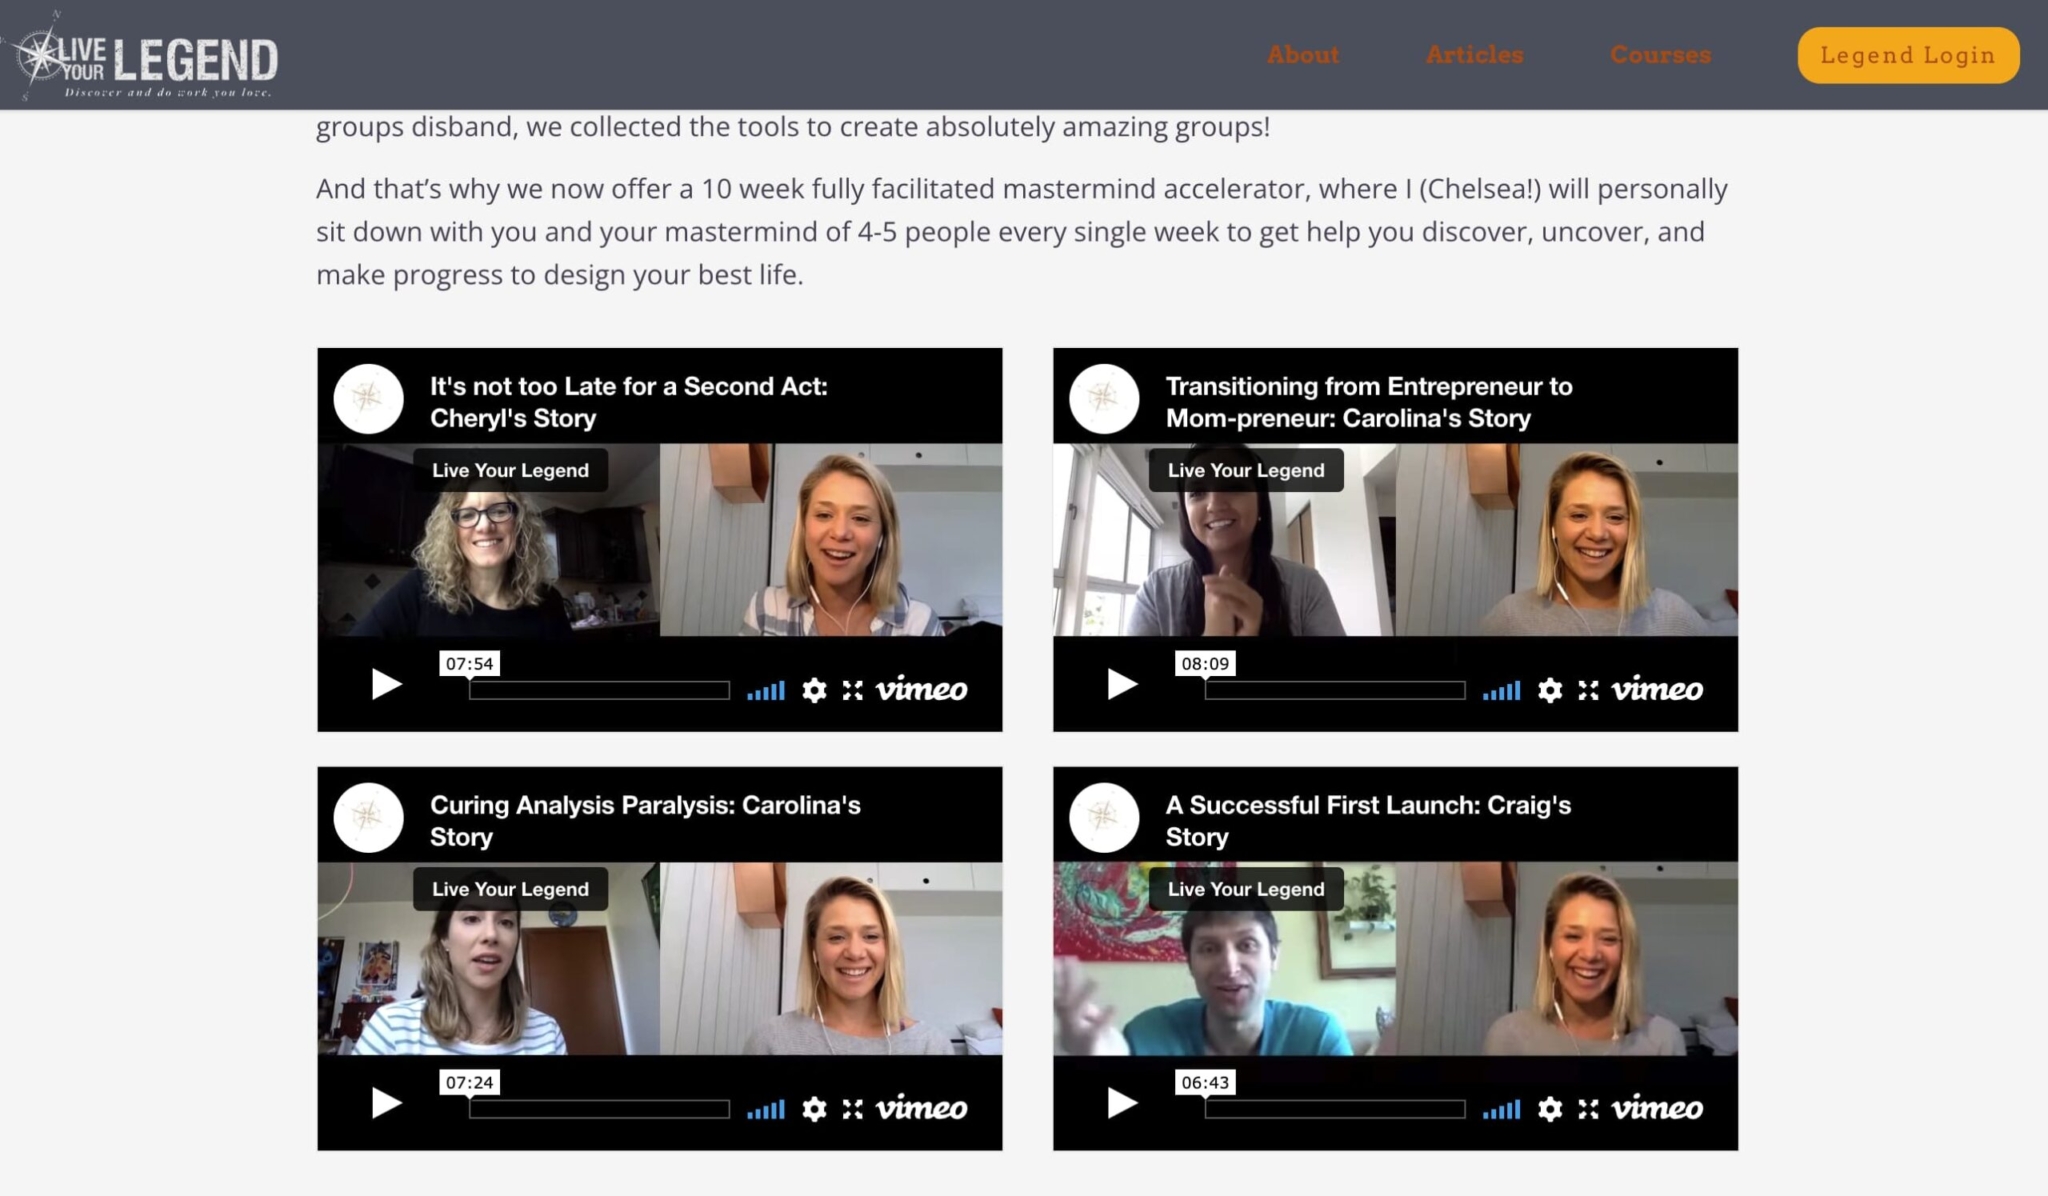 multiple video success stories in their landing page